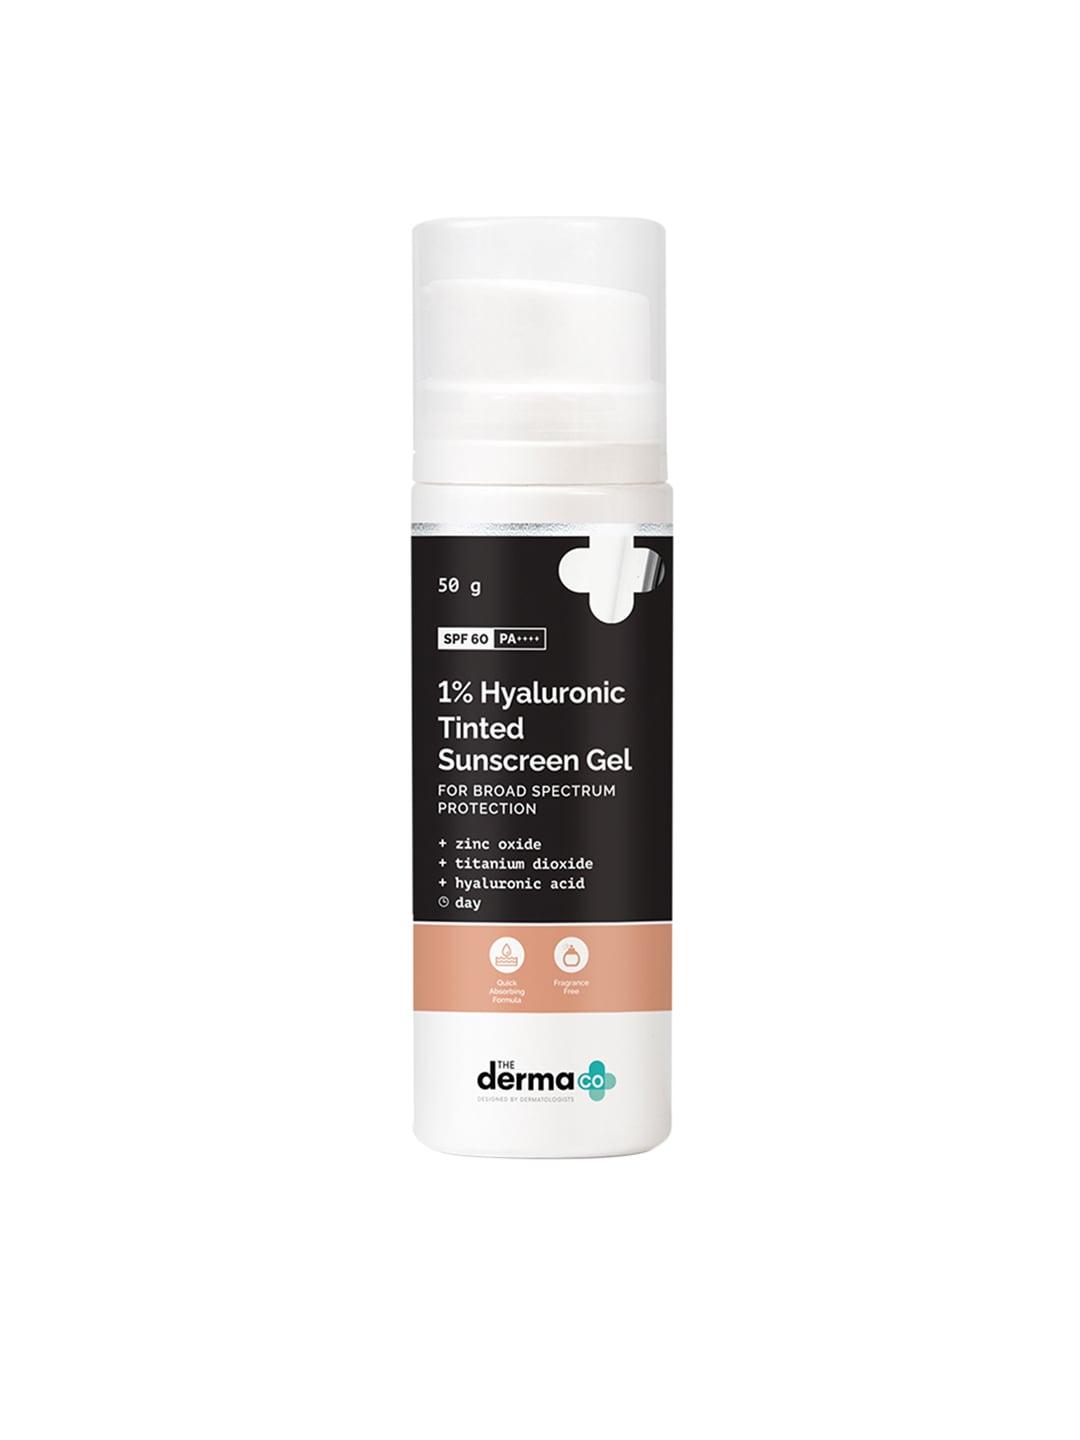 The Derma co. 1% Hyaluronic SPF 60 PA++++ Tinted Sunscreen Gel - 50 g